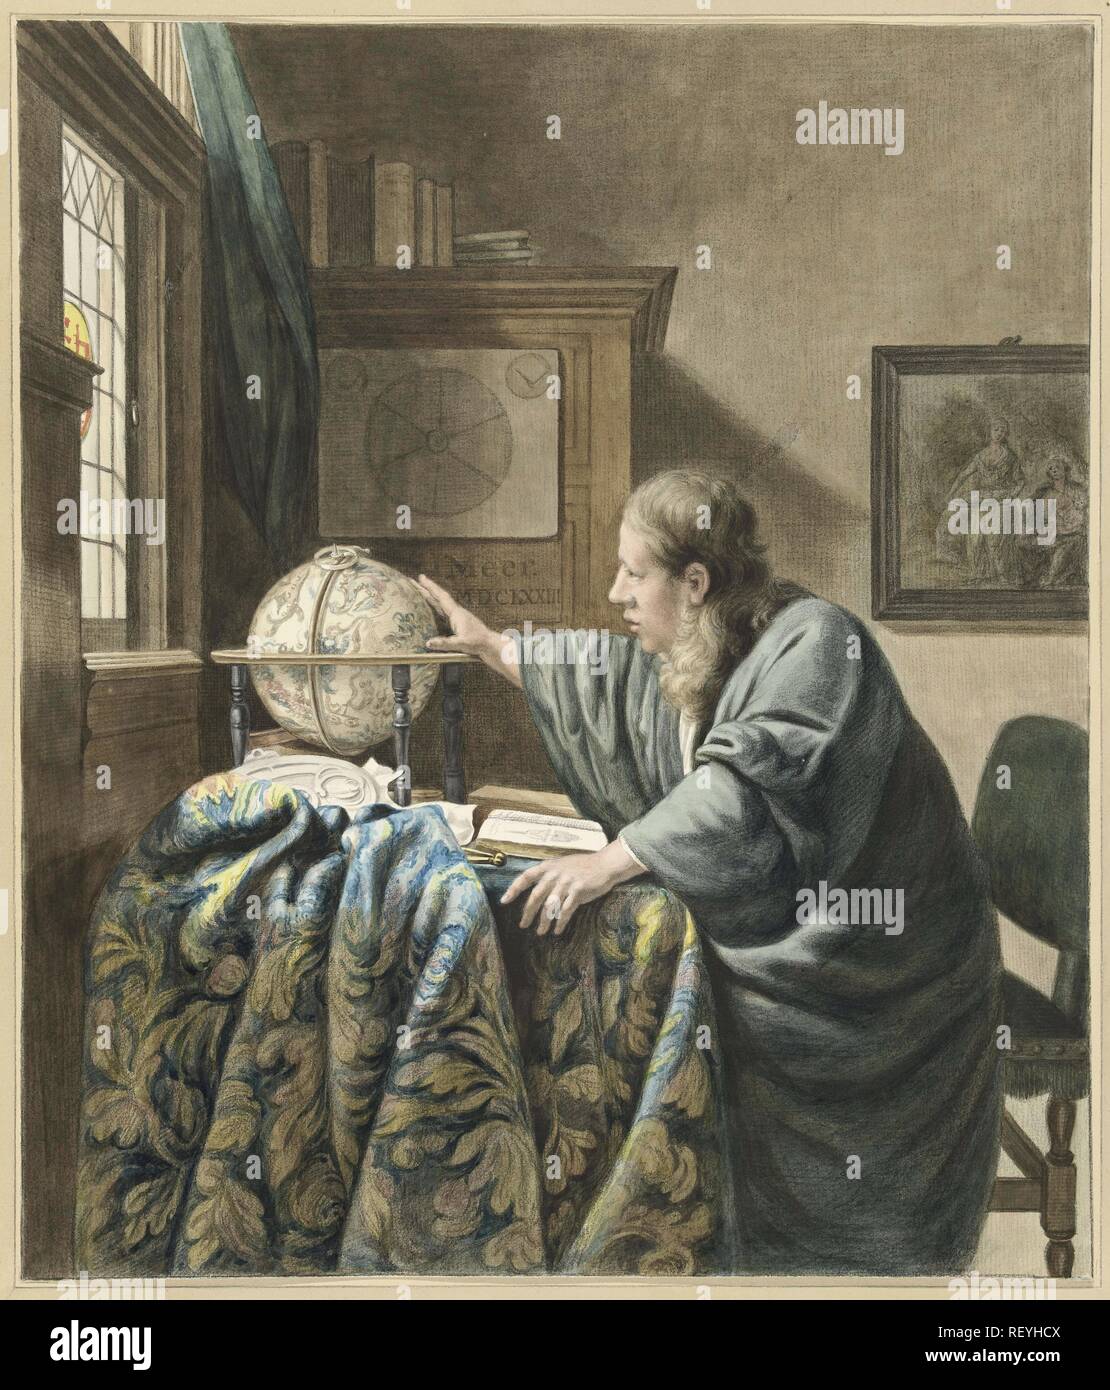 The astronomer. Draughtsman: Abraham Delfos. After Johannes Vermeer. Dating: 1794. Measurements: h 429 mm × w 367 mm. Museum: Rijksmuseum, Amsterdam. Stock Photo